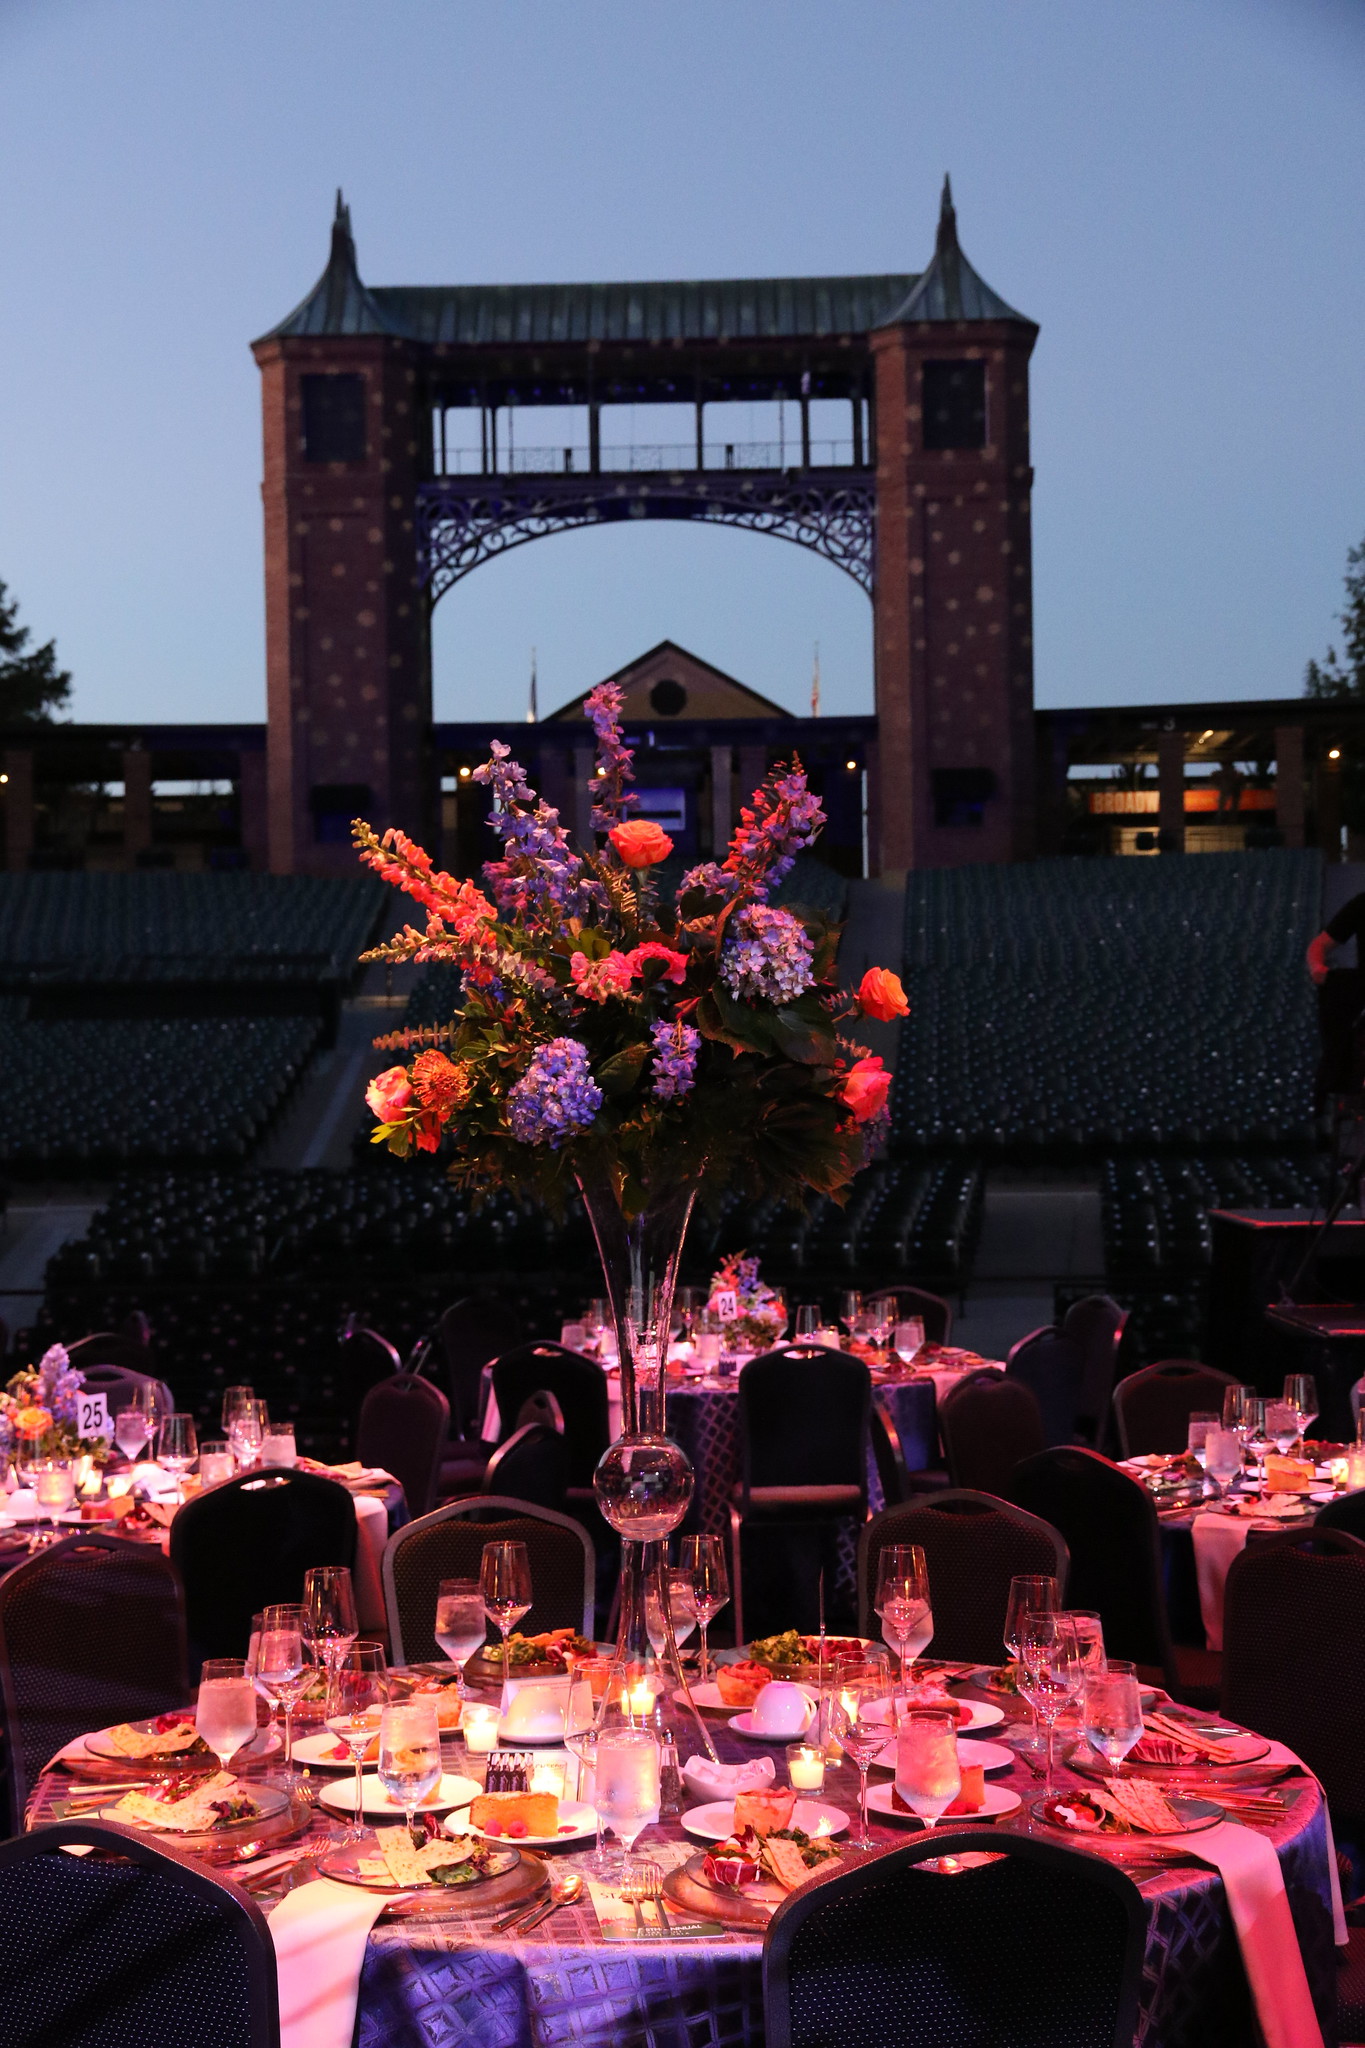 Flowers on a table set for the gala with the light tower in the background